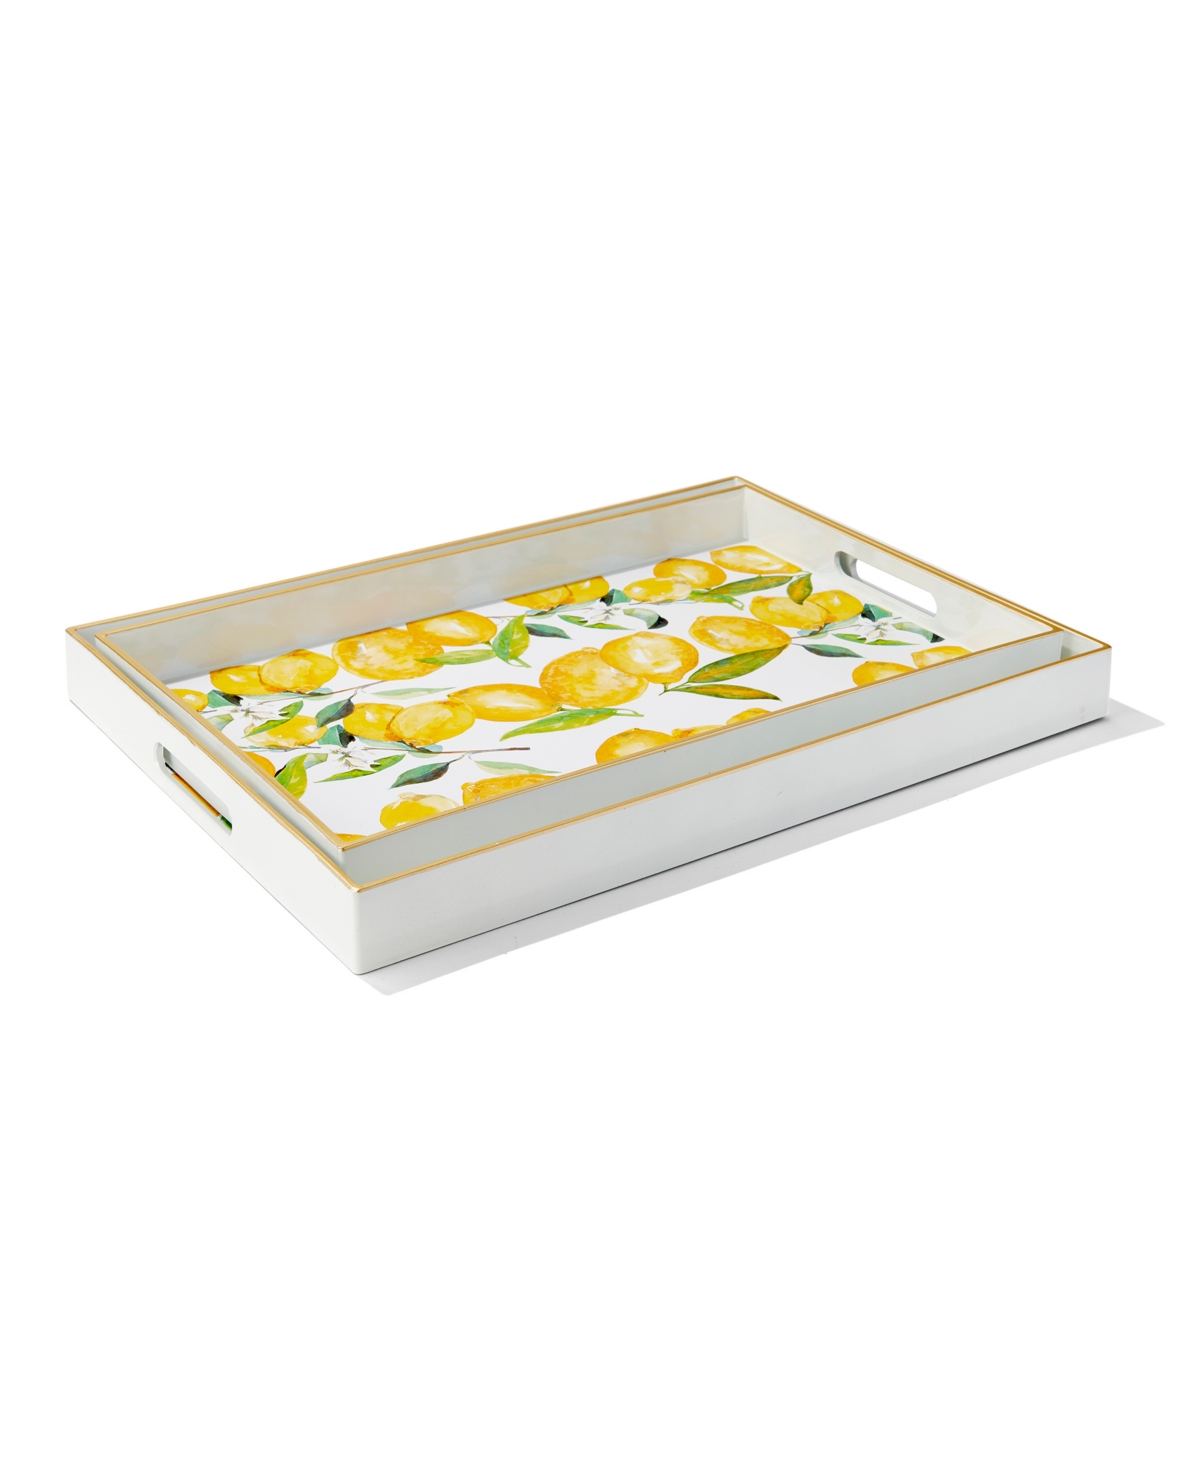 American Atelier Lemon Branches Trays Set, 2 Piece In Yellow